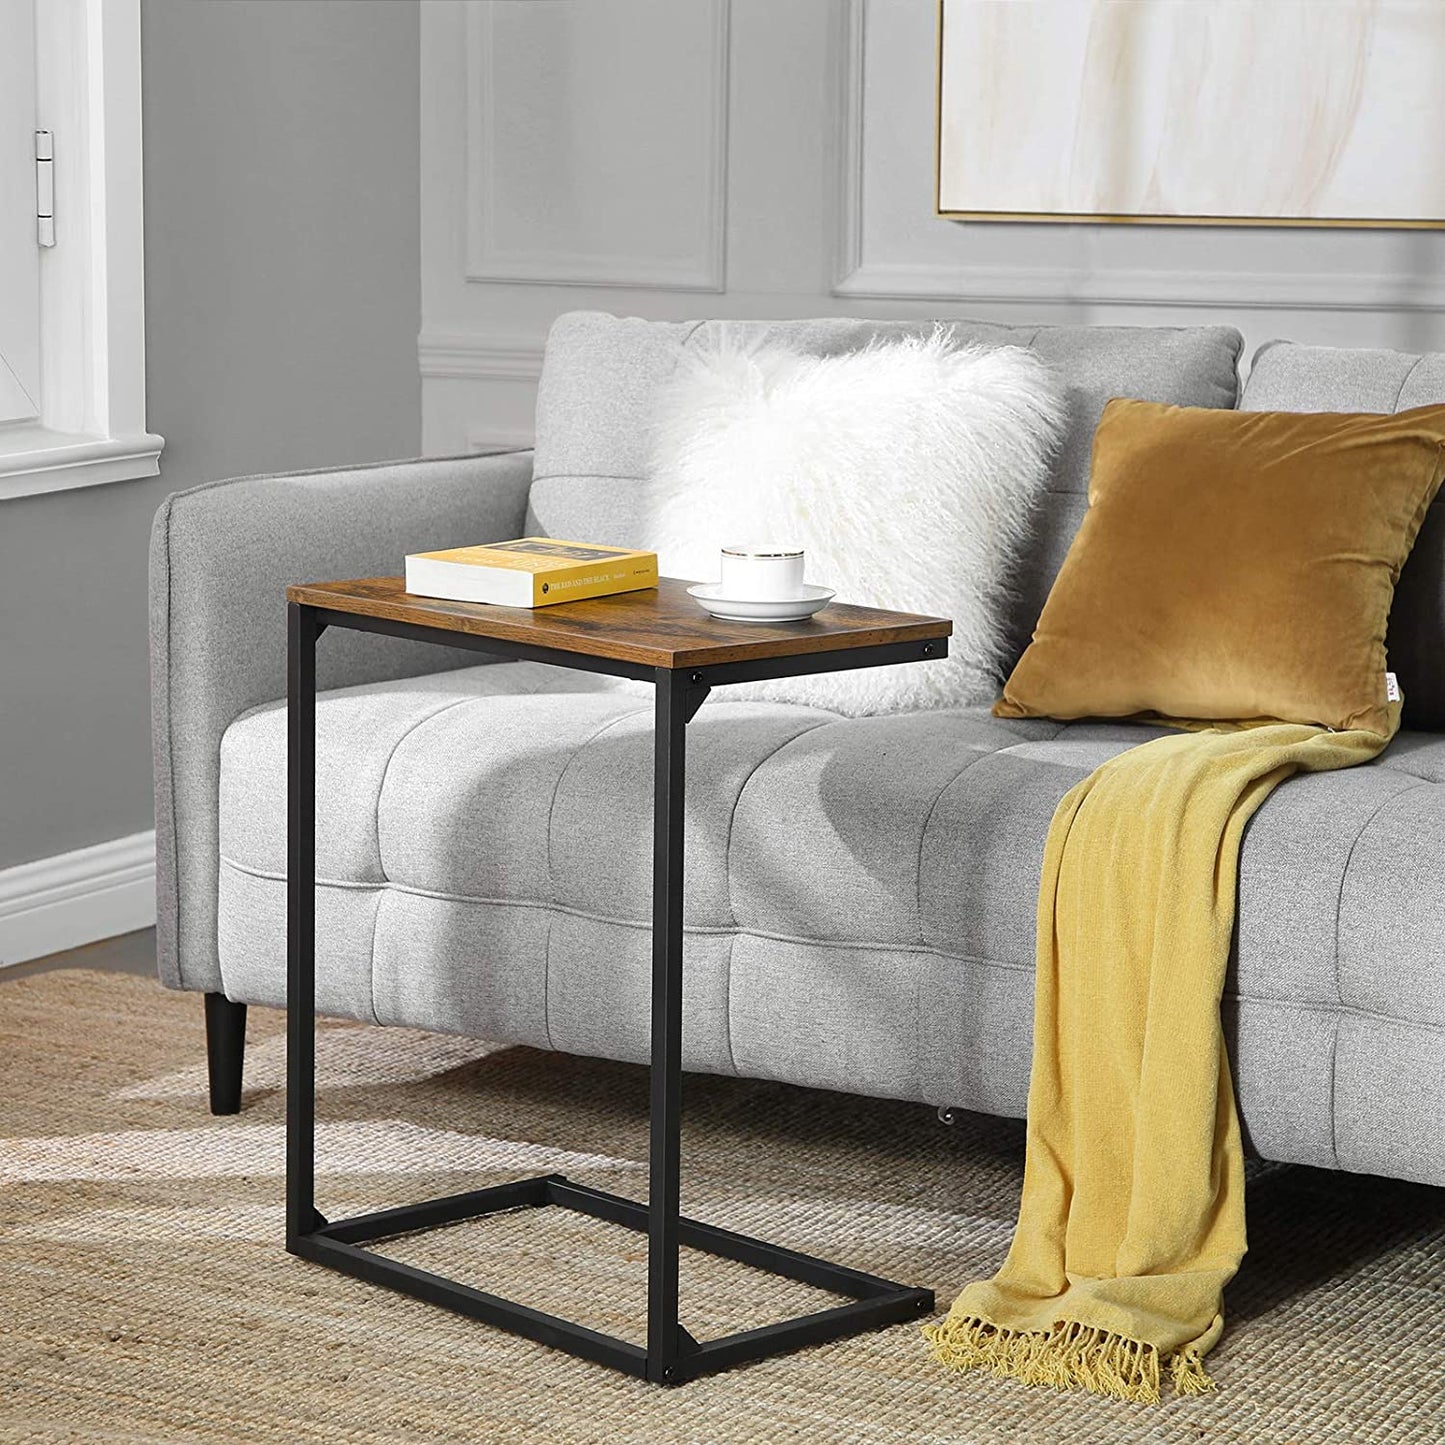 Nancy's Silicon 2 Side Table - Side Tables - Industrial - Vintage Brown and Black - 55 x 35 x 66 cm